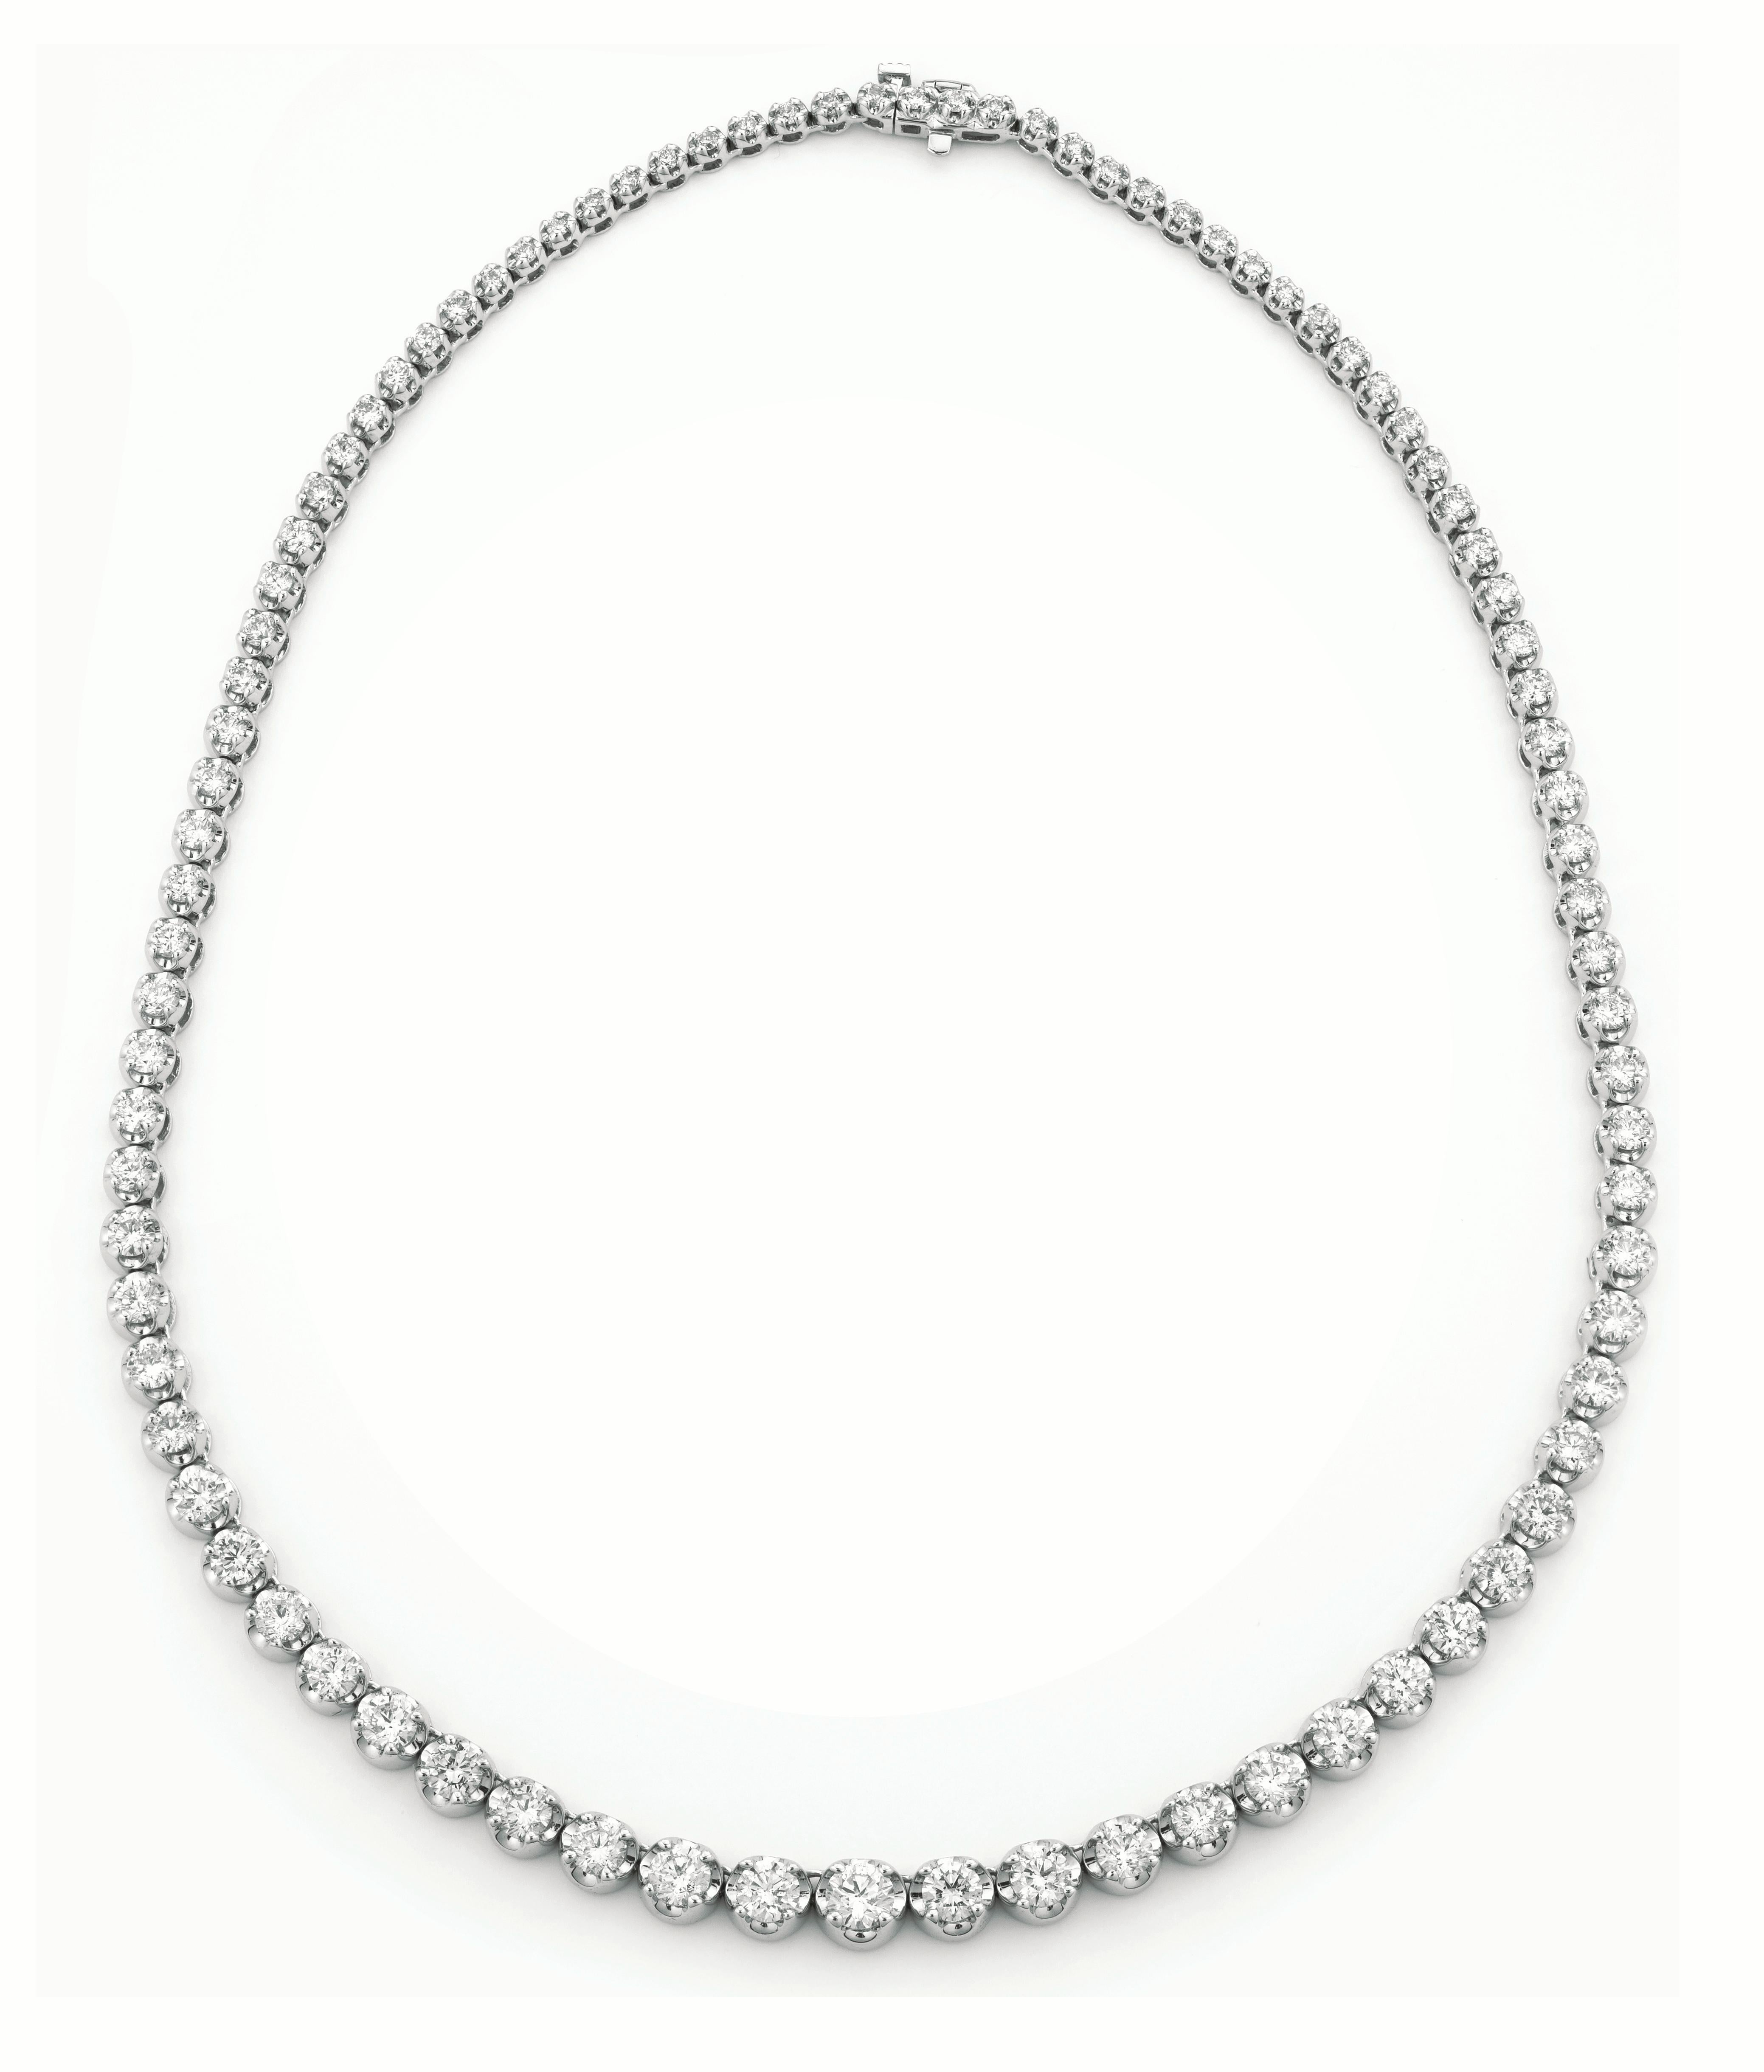 
10.40 Natural Carat Diamond Tennis Necklace G SI 14K White Gold

    100% Natural Diamonds, Not Enhanced in any way Round Cut Diamond Necklace  
    10.40CTW
    Color G-H 
    Clarity SI  
    14K White Gold, Prong style, 24.39 grams
    16 inches